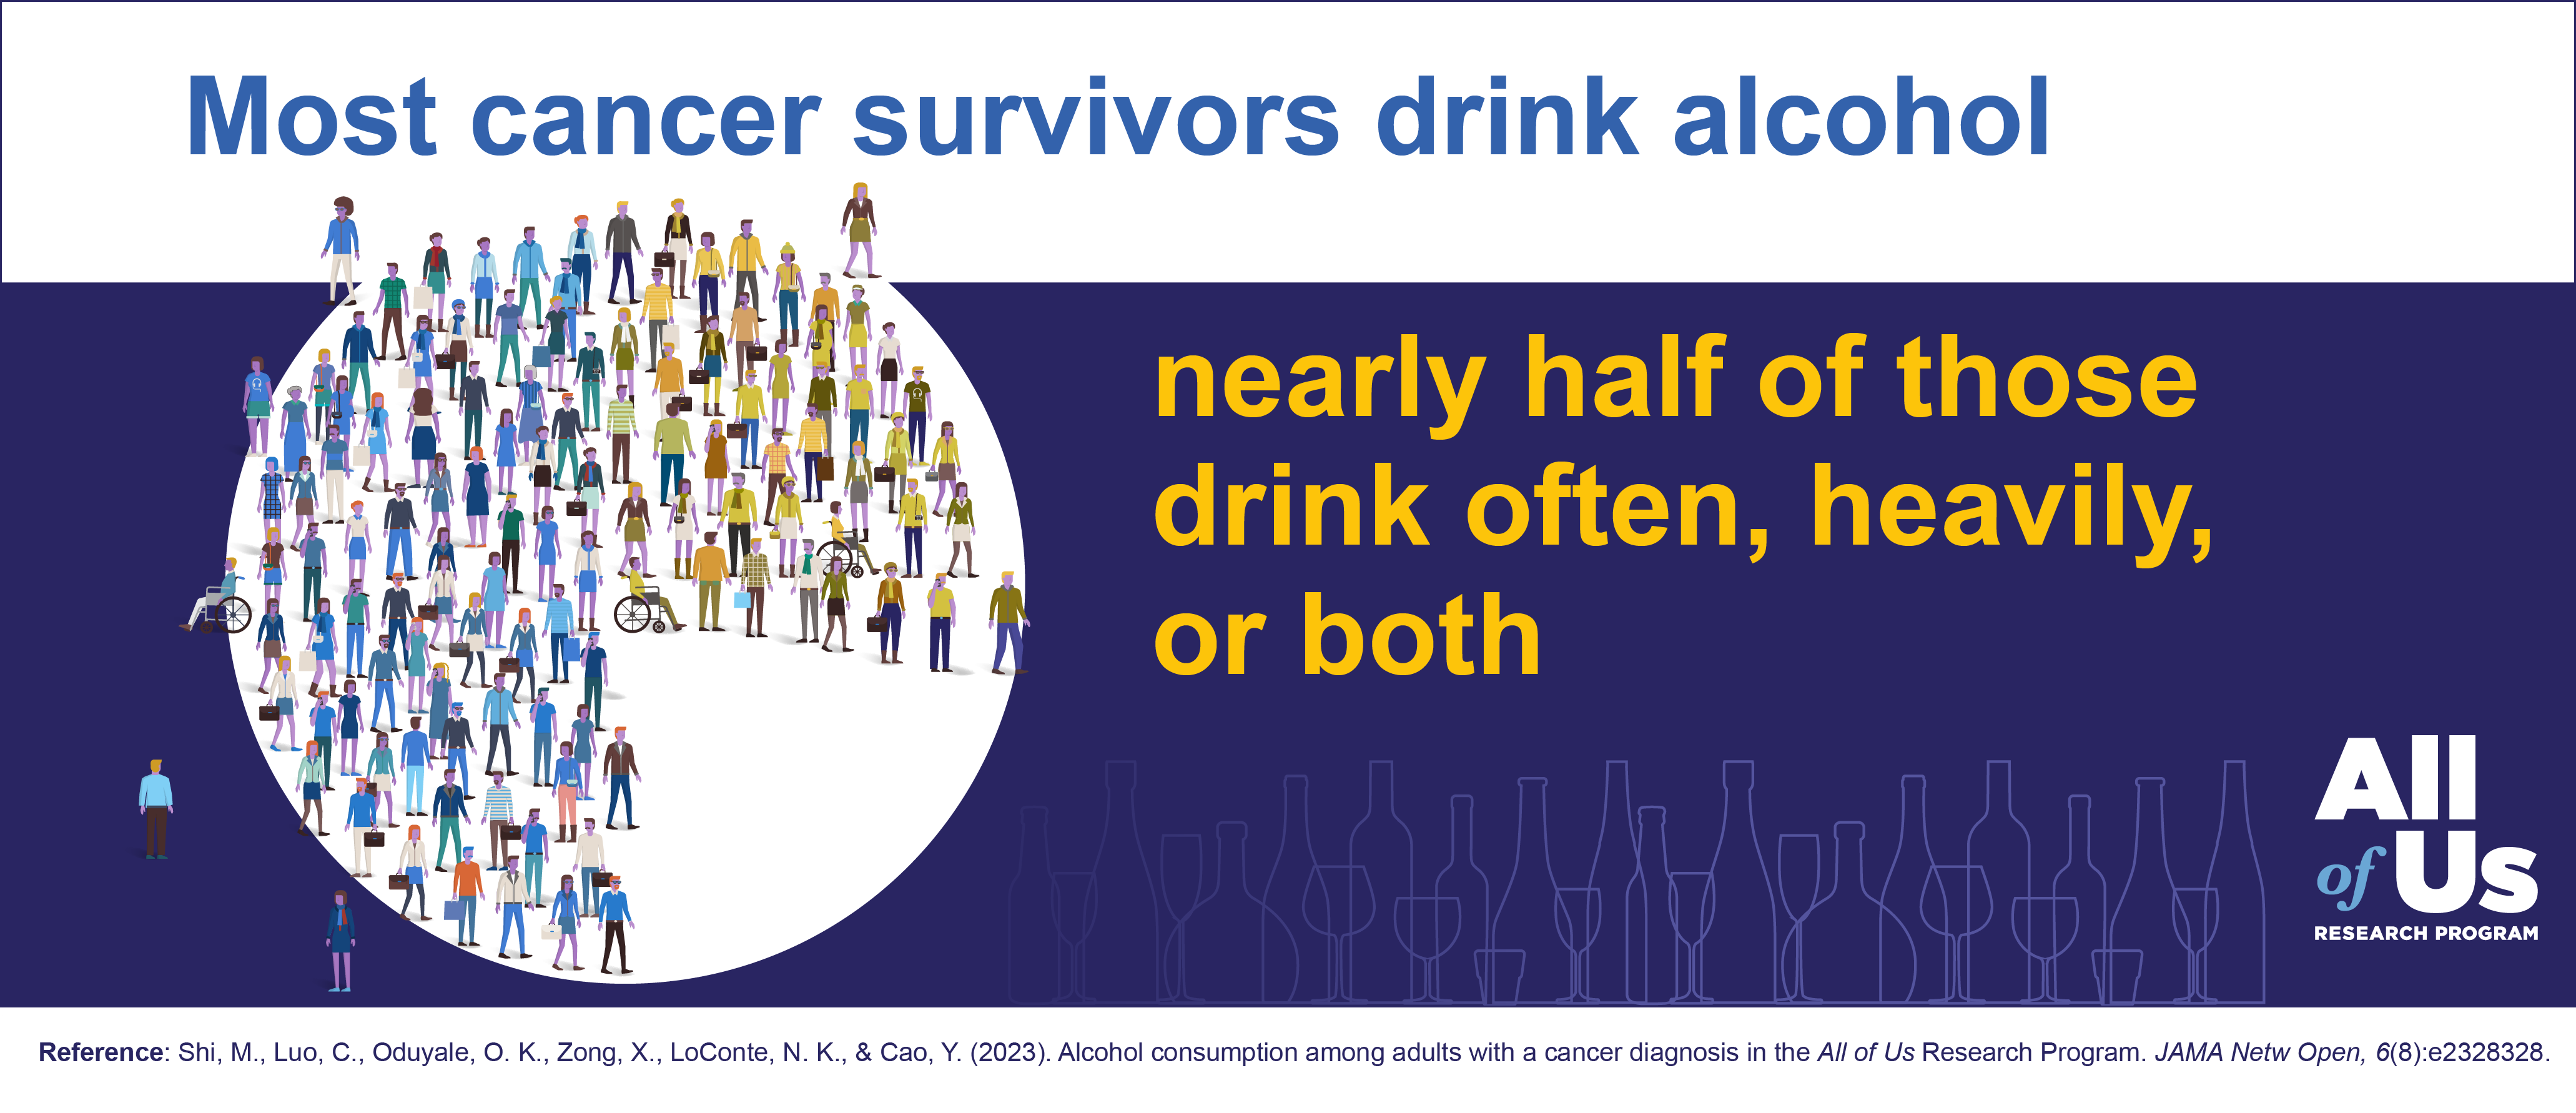 Most cancer survivors drink alcohol. Nearly half of those drink often, heavily, or both. Reference: Shi, M.; Luo, C.; Oduyale, O.K.; Zong, X.; LoConte, N.K.; & Cao, Y. (2023). Alcohol consumption among adults with a cancer diagnosis in the All of Us Research Program. JAMA Network Open, 6(8):e2328328. A pie chart, comprising dozens of illustrated people, with one wedge slightly over one half of the chart and the other slightly more than one third of the chart. Logo of the All of Us Research Program.